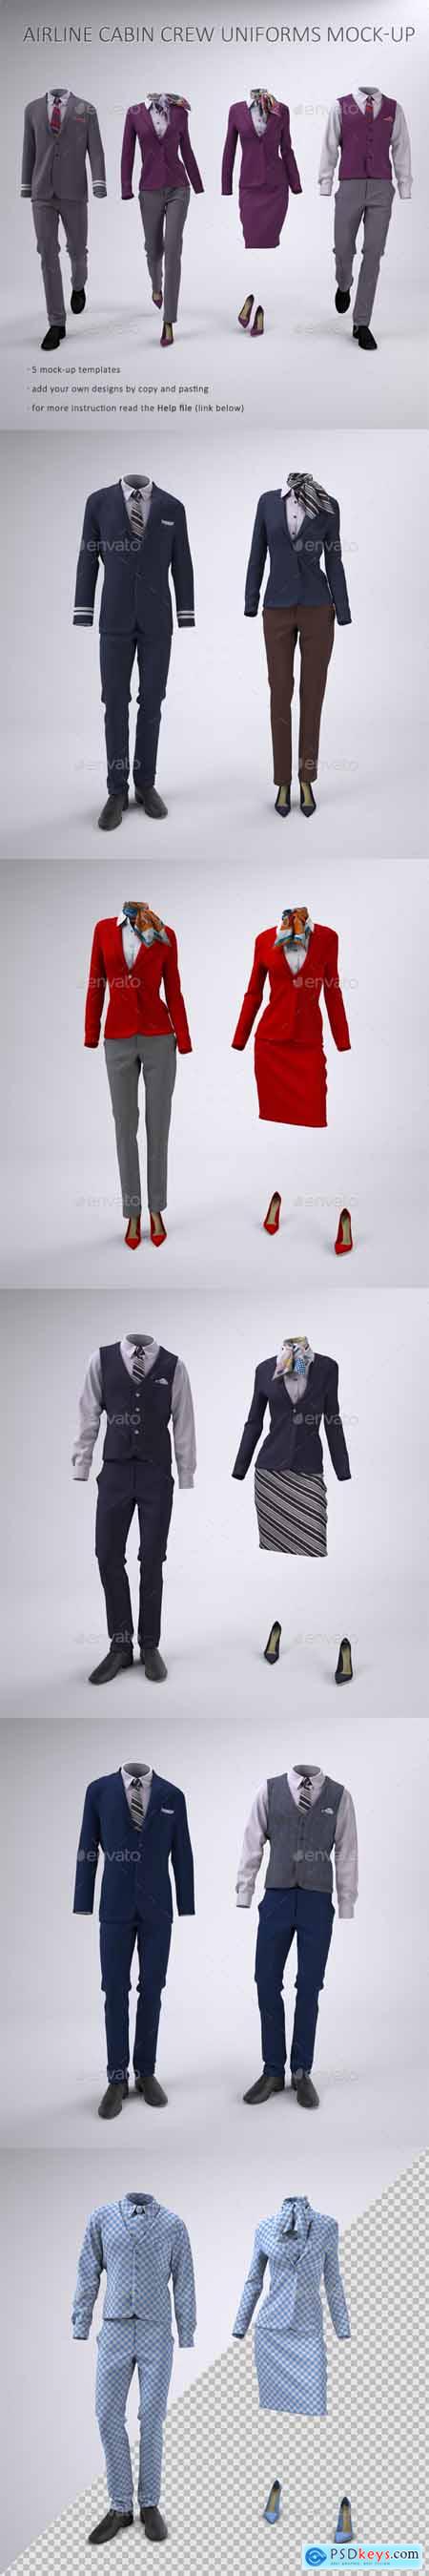 Download Airline Cabin Crew or Hotel Uniforms Mock-Up 23268316 ...